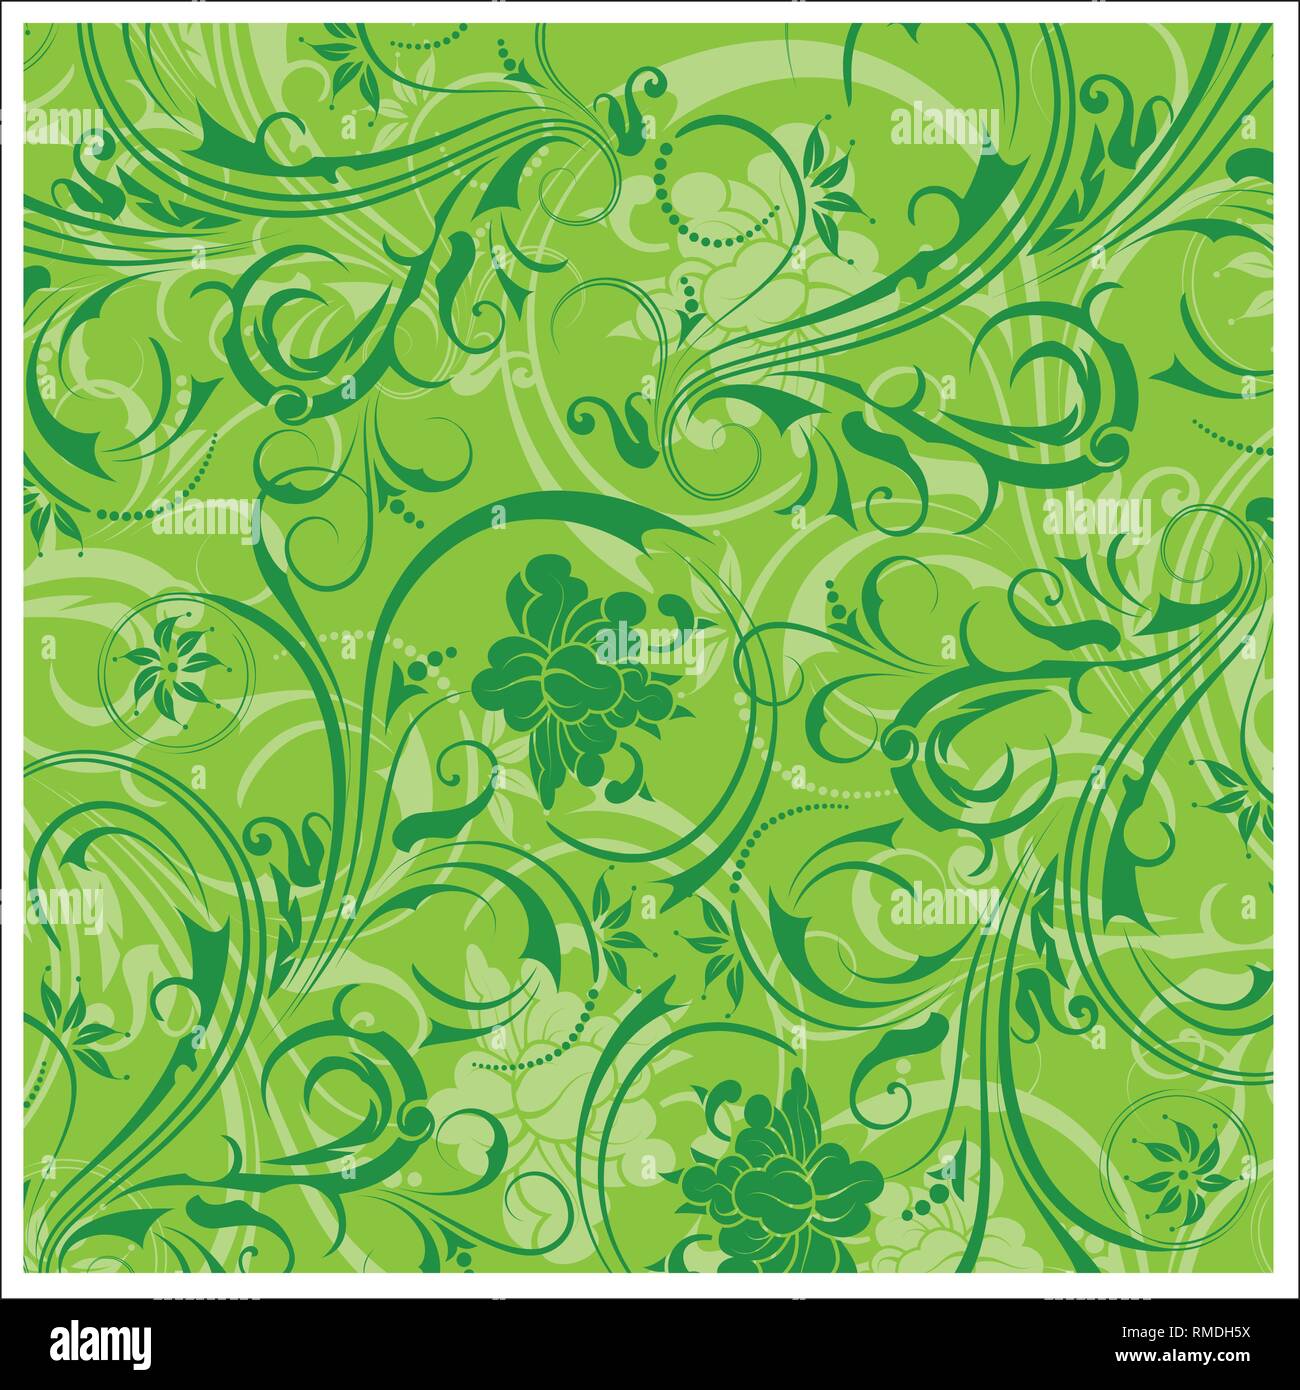 Batik design style patterns are the same for fabric design, background, home decor, wallpaper, print design, and other designs Stock Vector